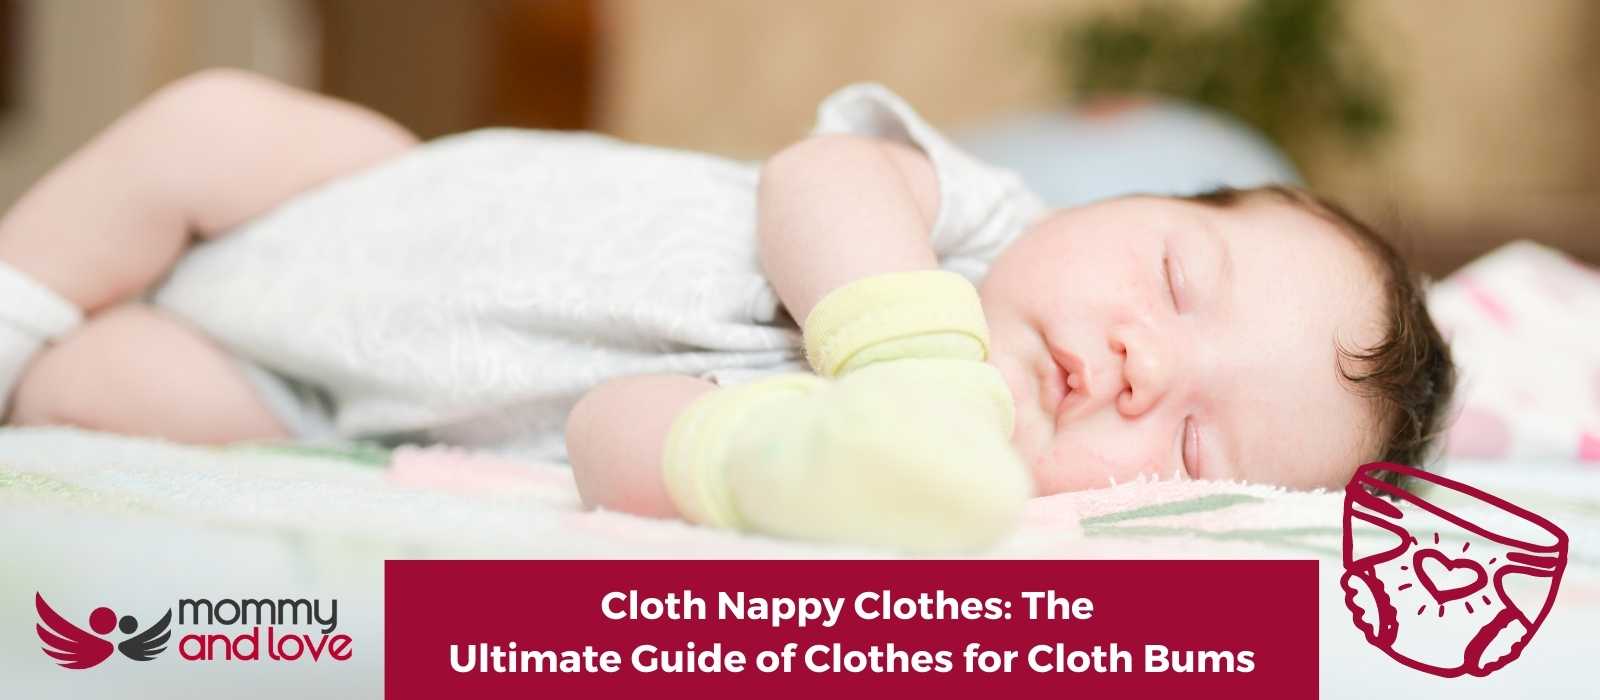 Cloth Nappy Clothes The Ultimate Guide of Clothes for Cloth Bums